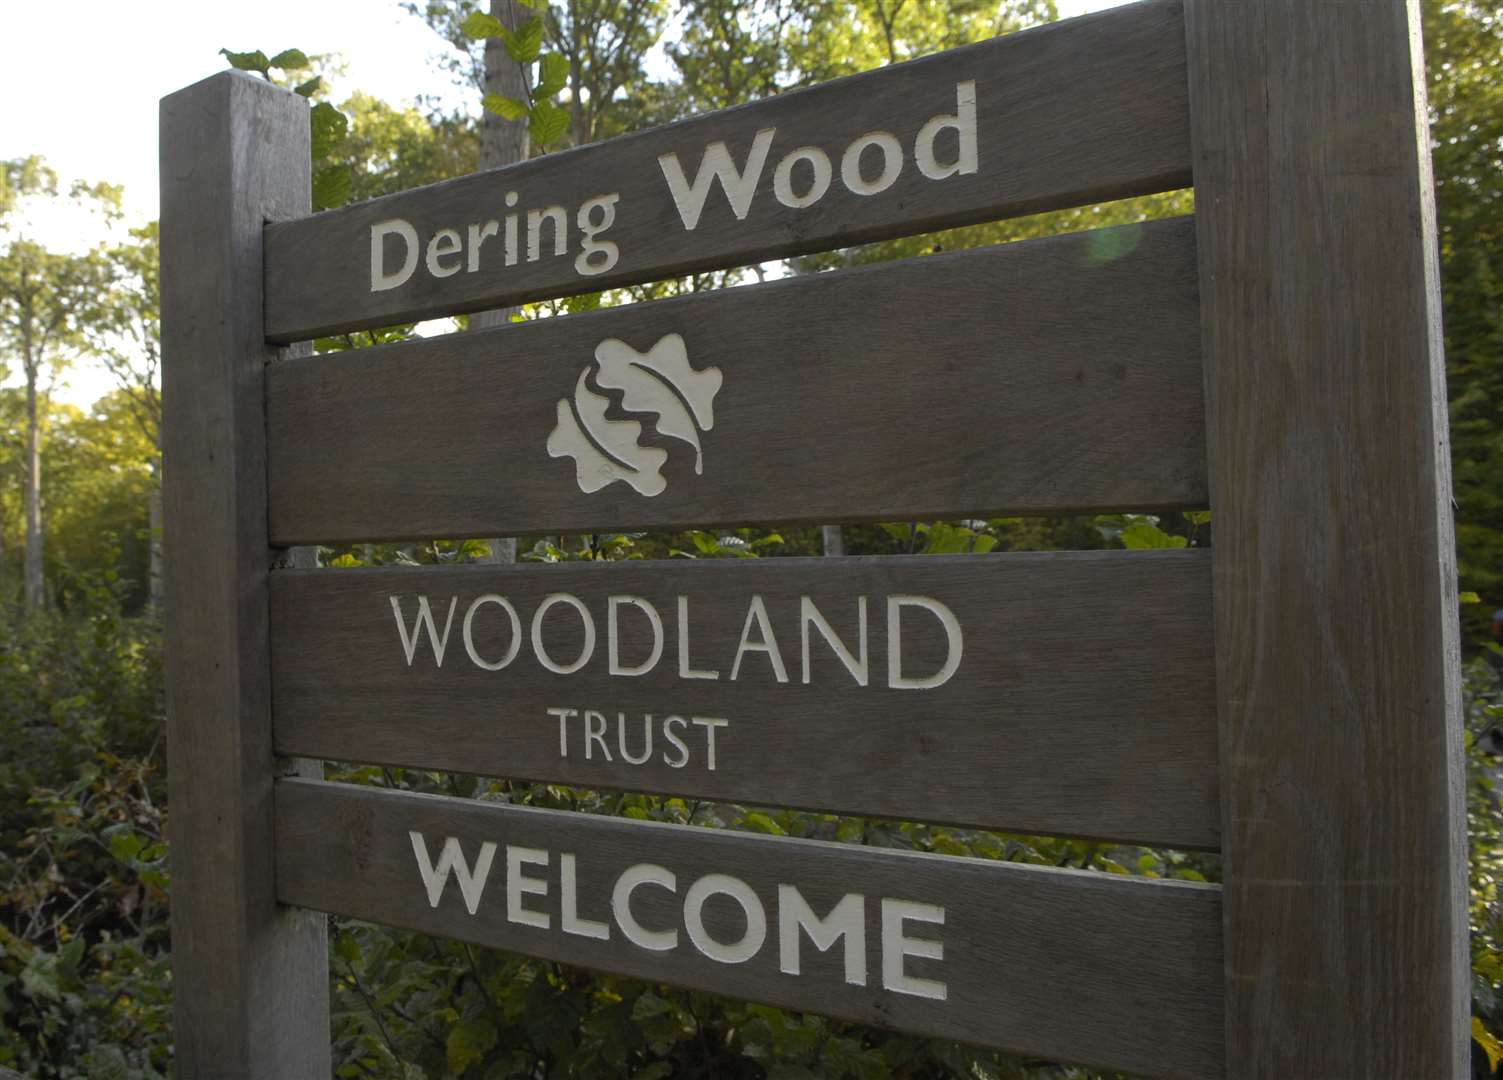 The Dering Wood car park is reopening today